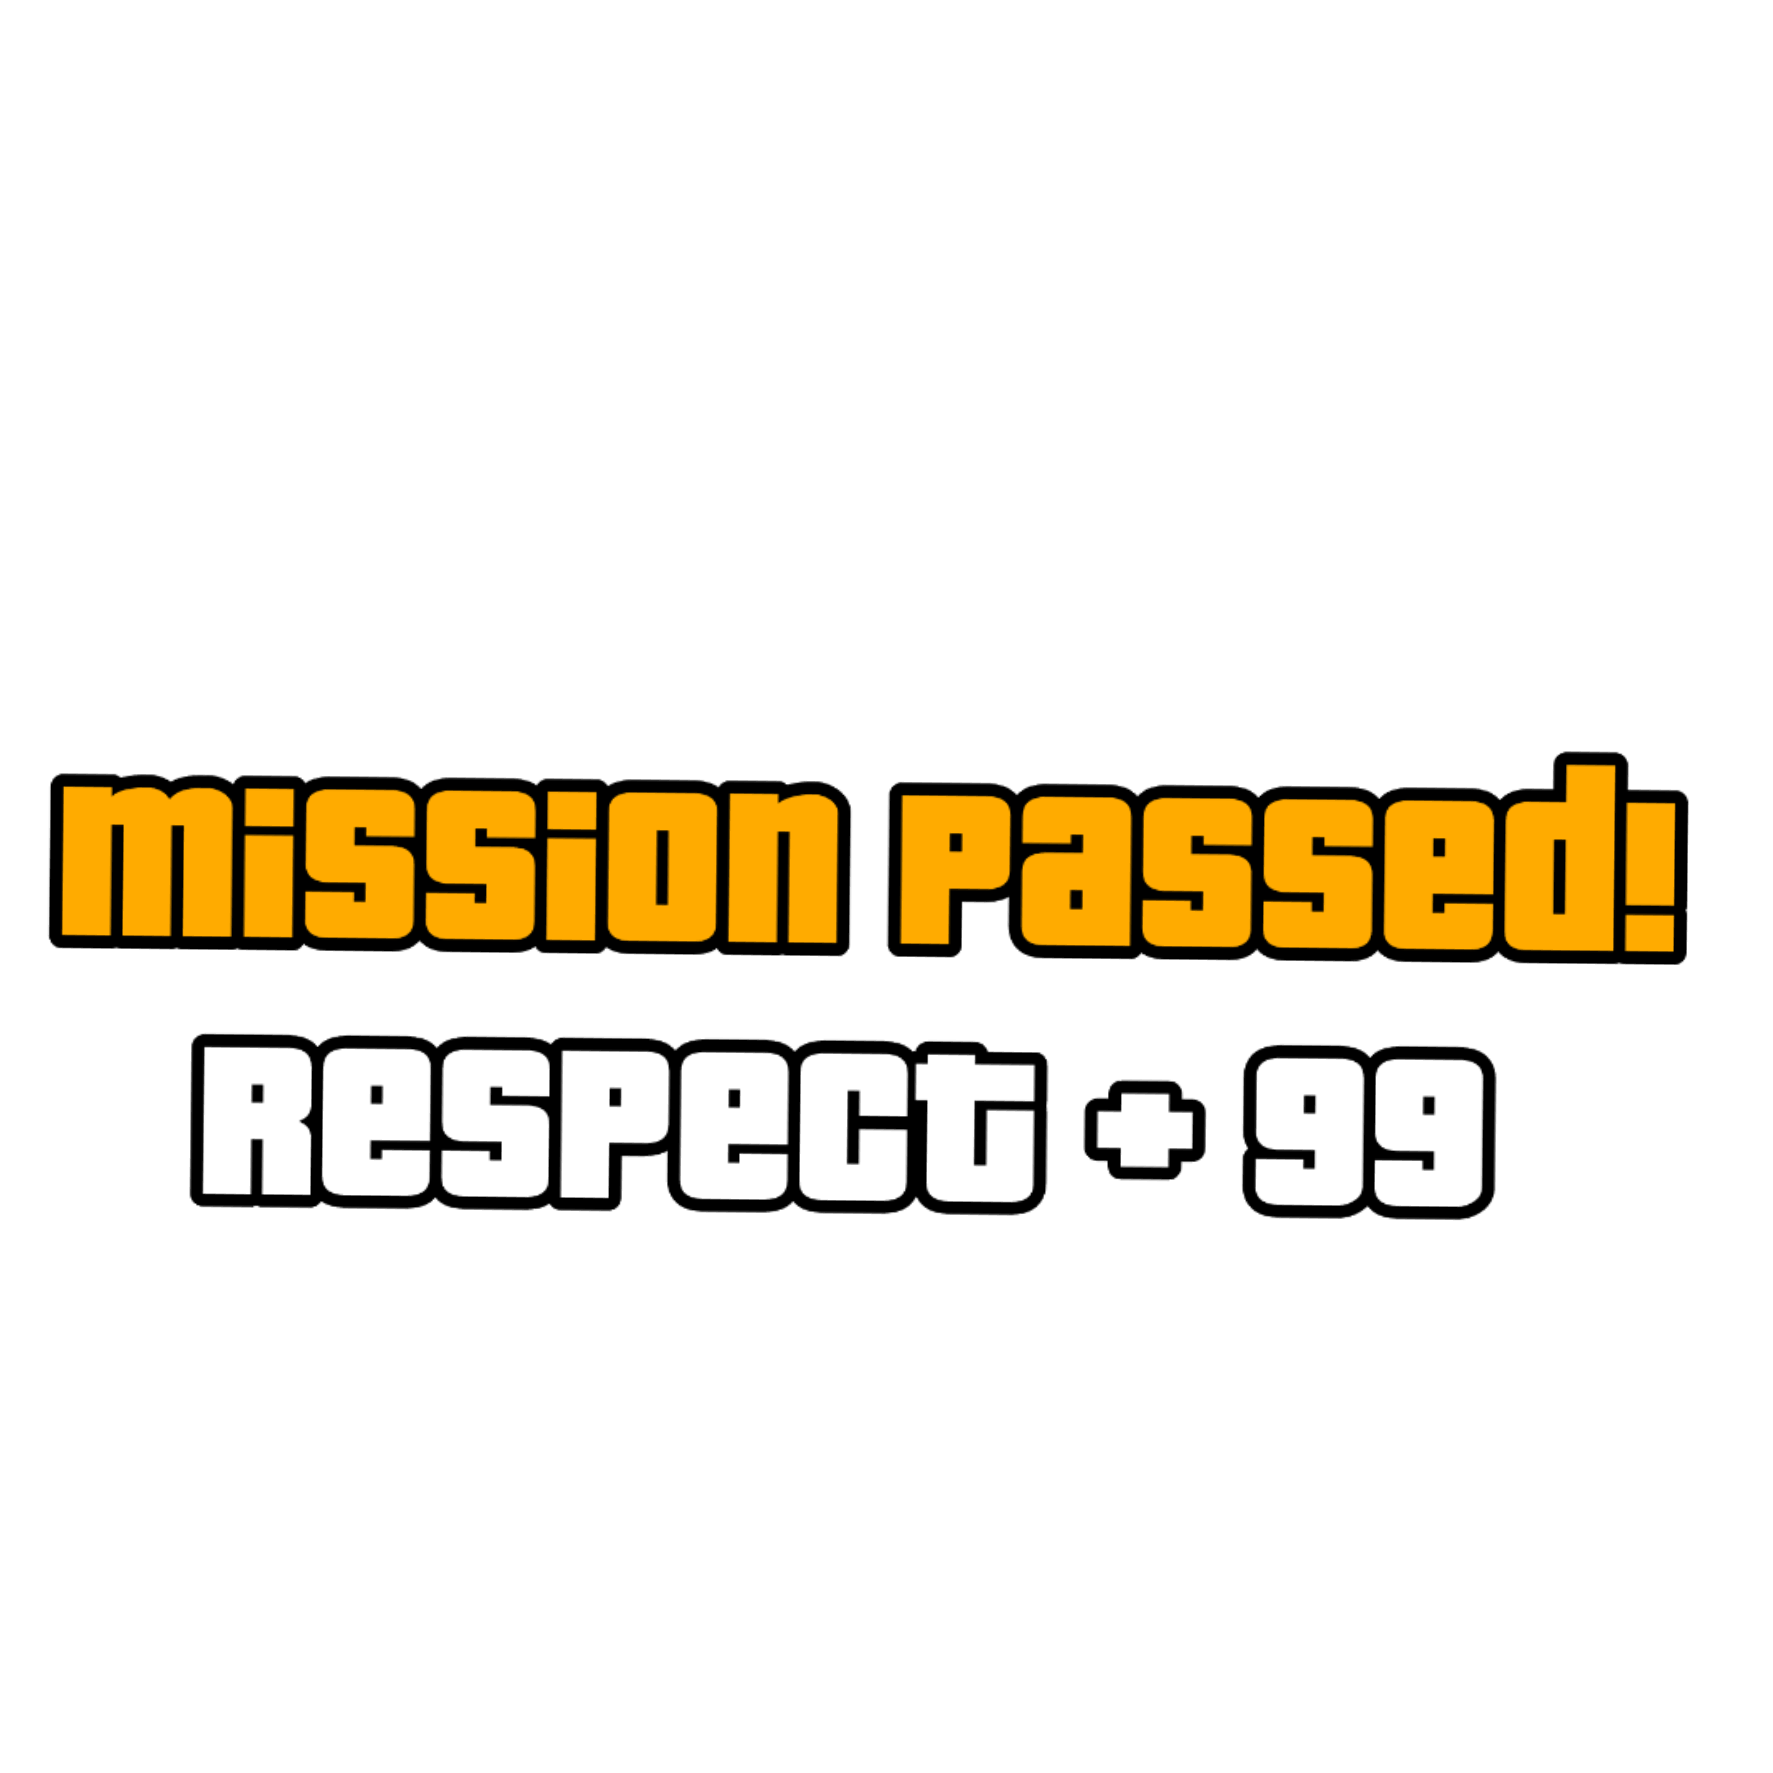 Complete the mission to obtain 15. ГТА Сан андреас Mission complete. GTA Mission Passed. Mission complete respect+ GTA. Mission Passed без фона.